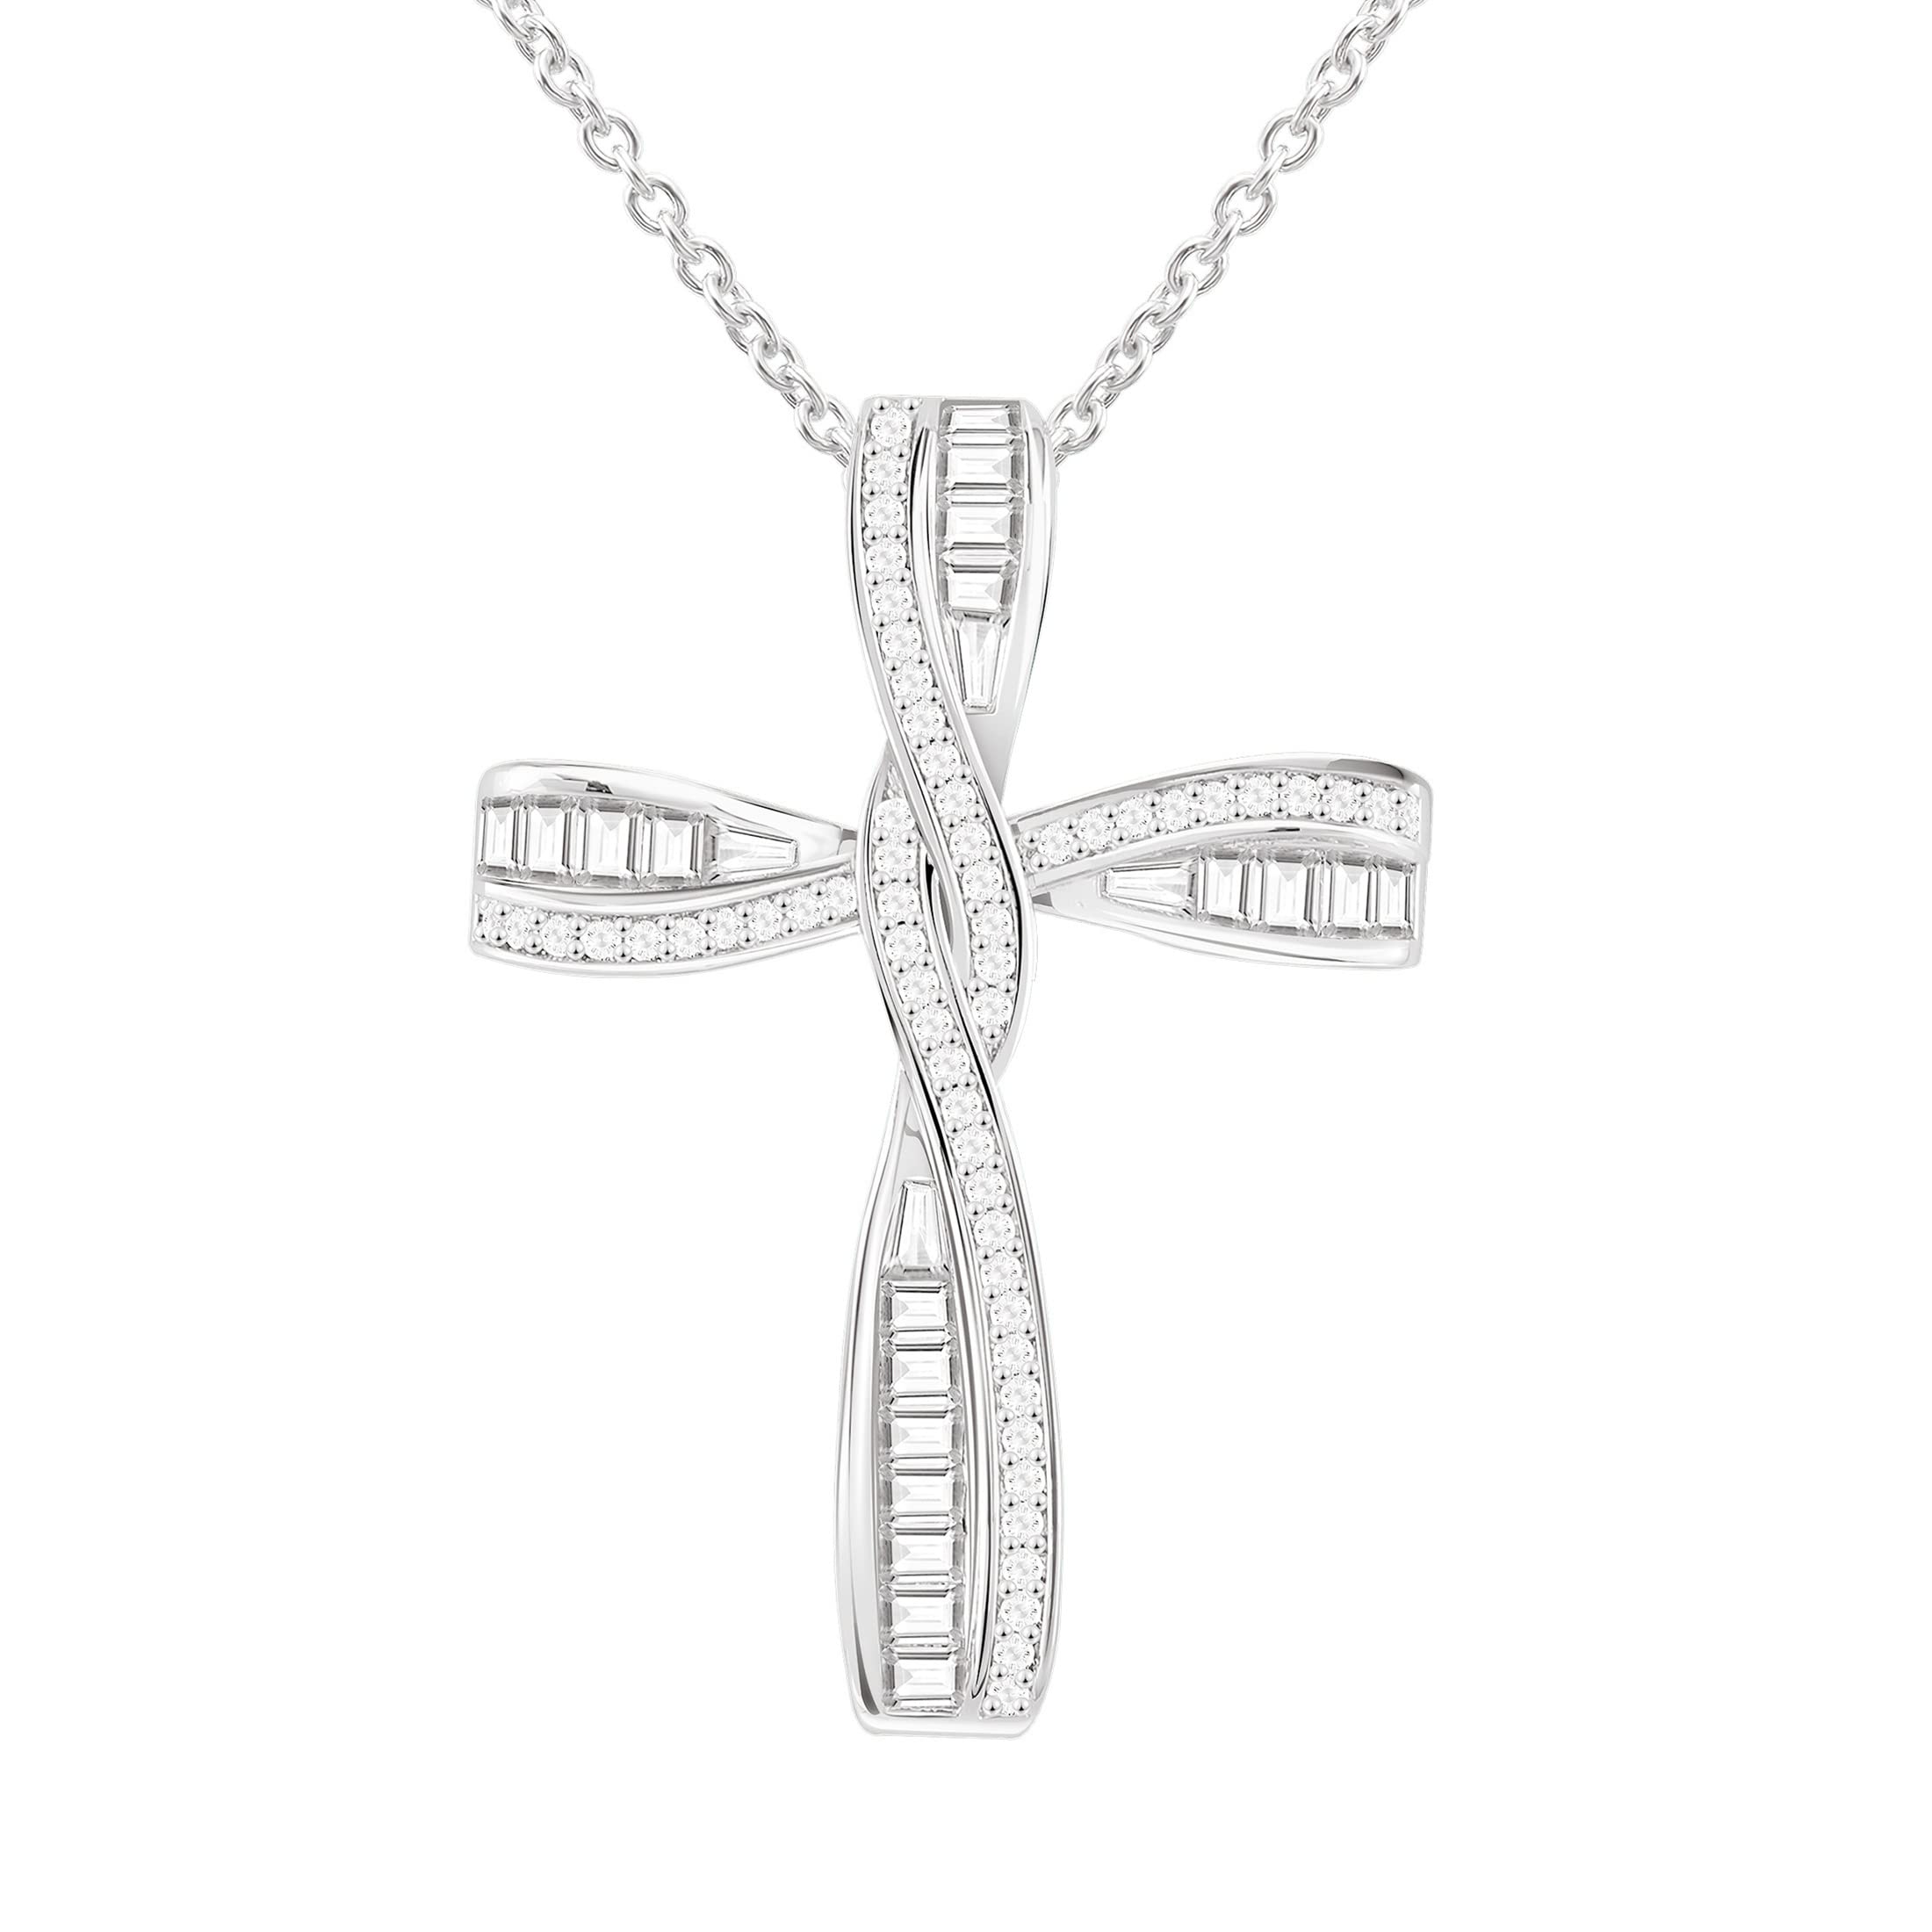 Amazon.com: luomart Cross Necklace Gifts for Girls,Women Cross Necklaces  Gifts Religious Pendant Christian Jewelry (Cross Gifts for Girls) :  Clothing, Shoes & Jewelry